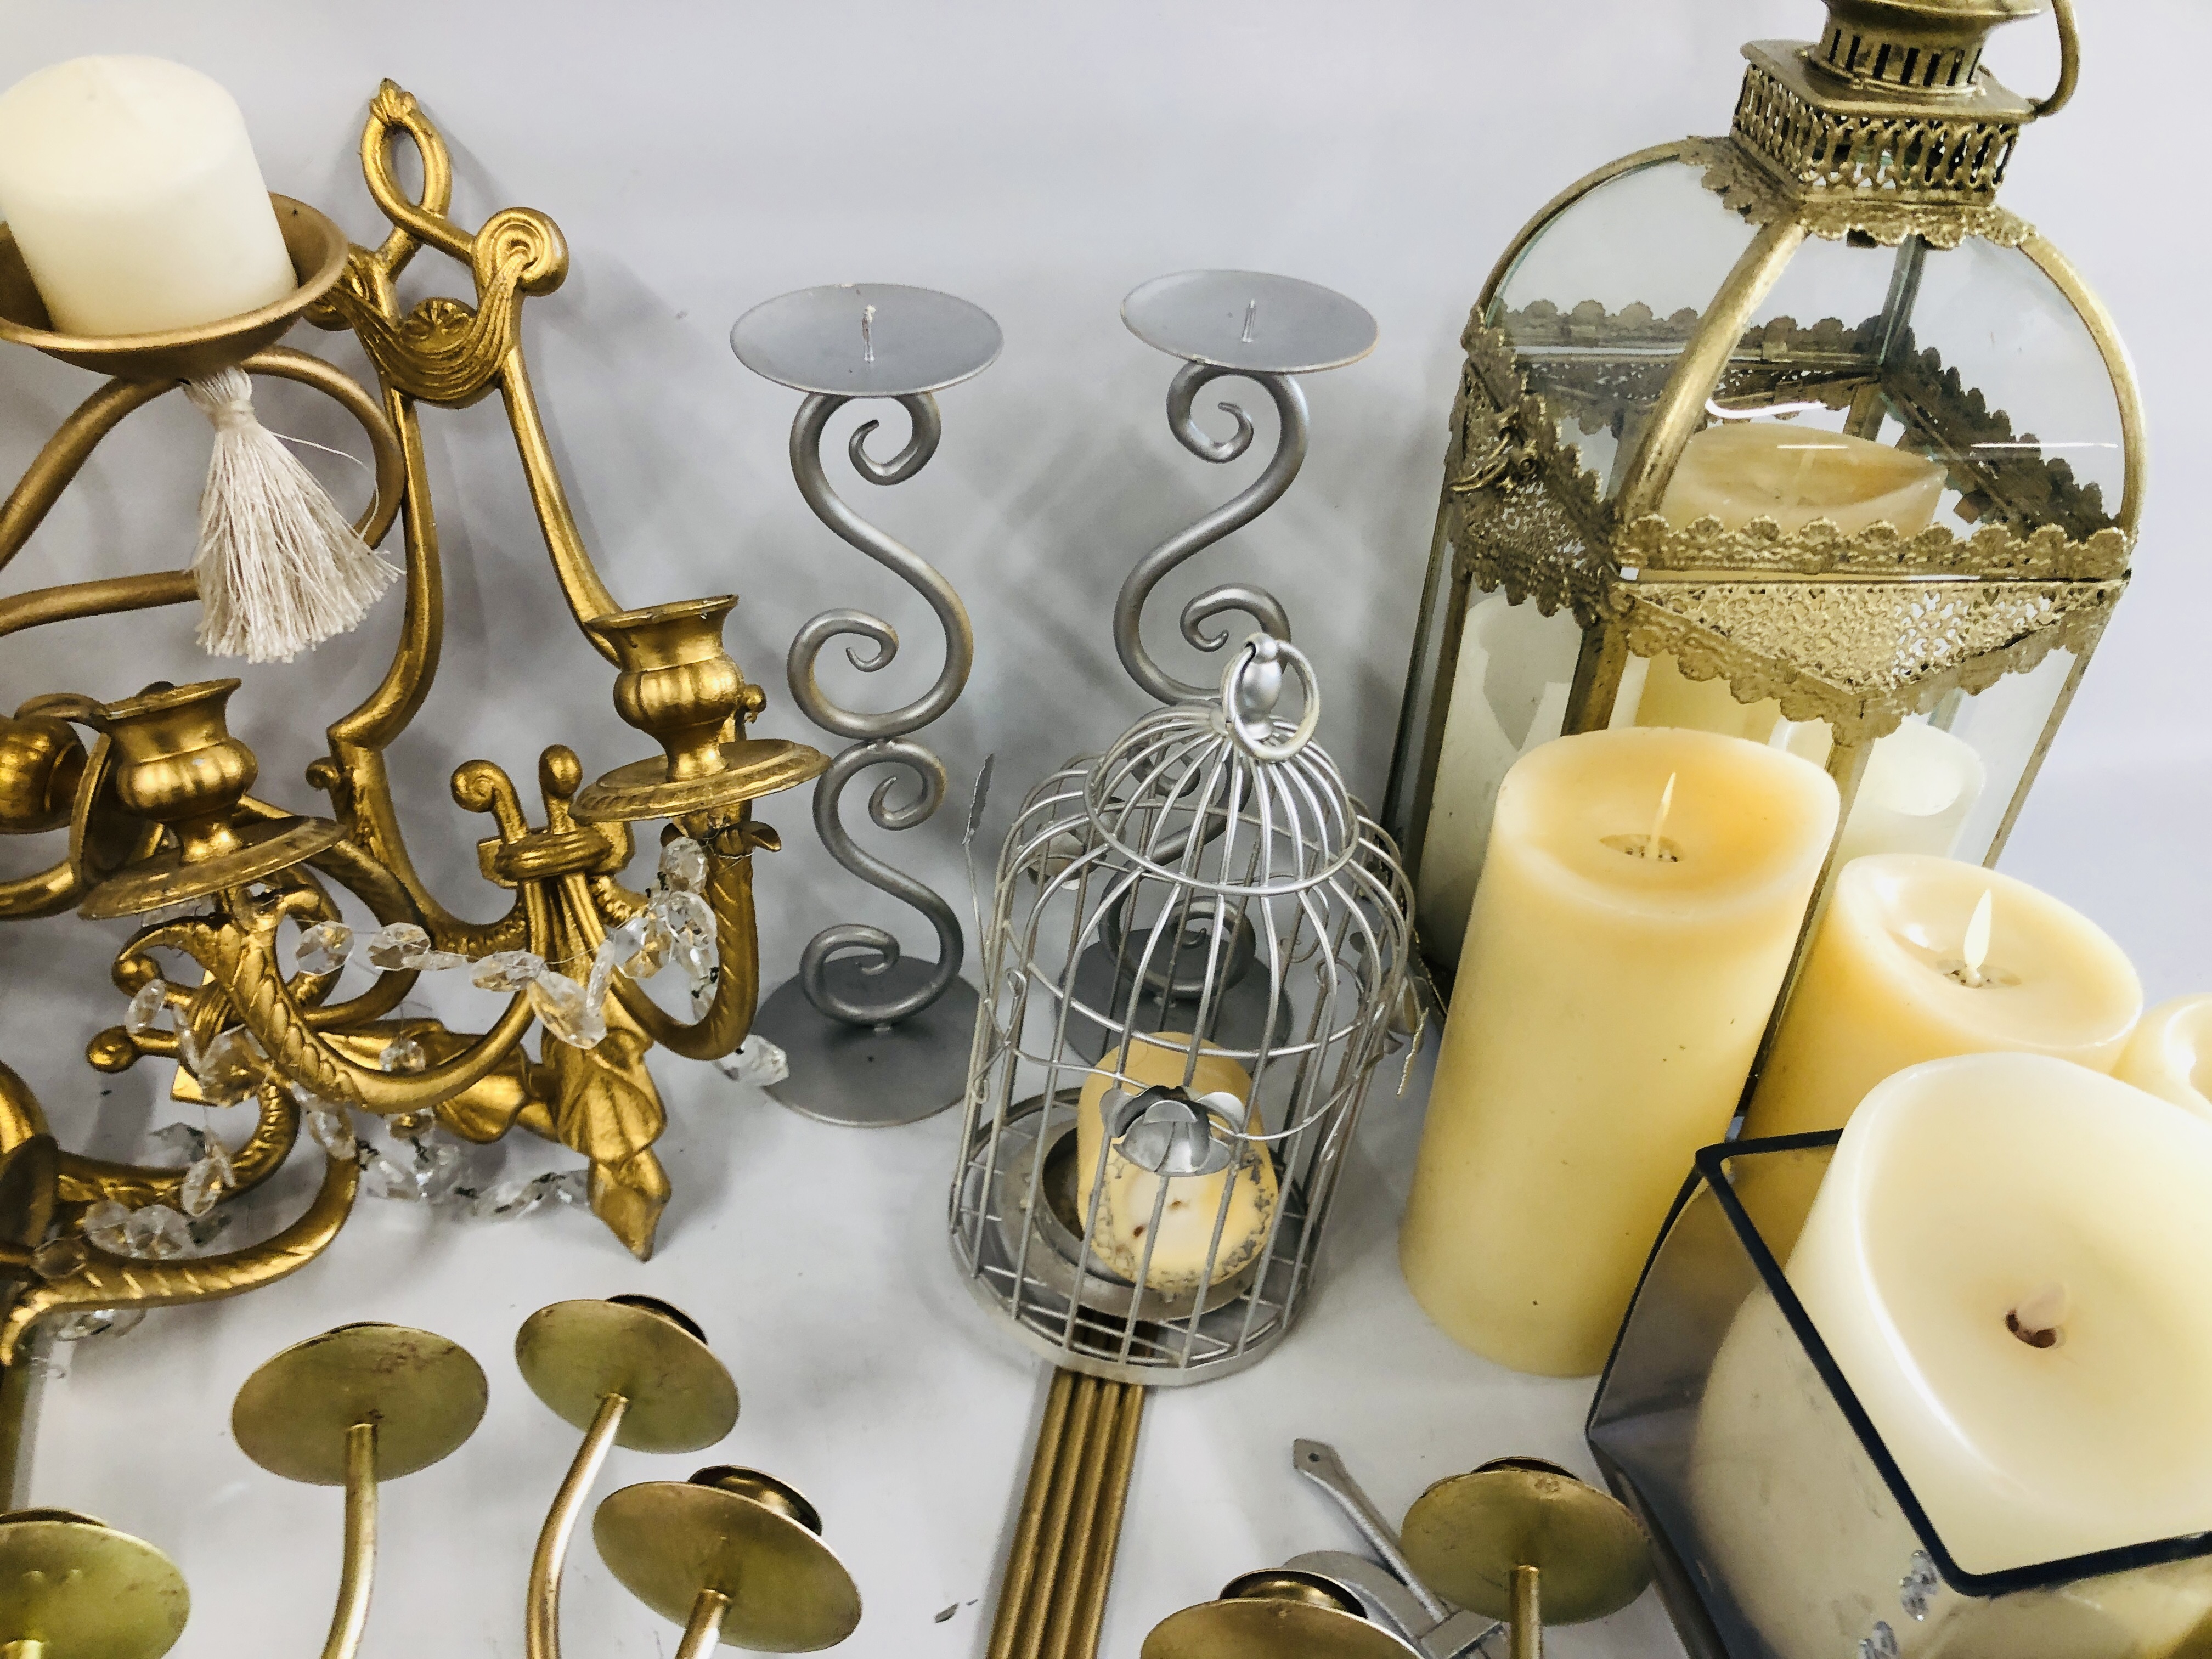 LARGE BOX OF ASSORTED MODERN SHABBY CHIC METAL CRAFT CANDLE STICKS, STANDS AND WALL SCONCES, ETC. - Image 5 of 8